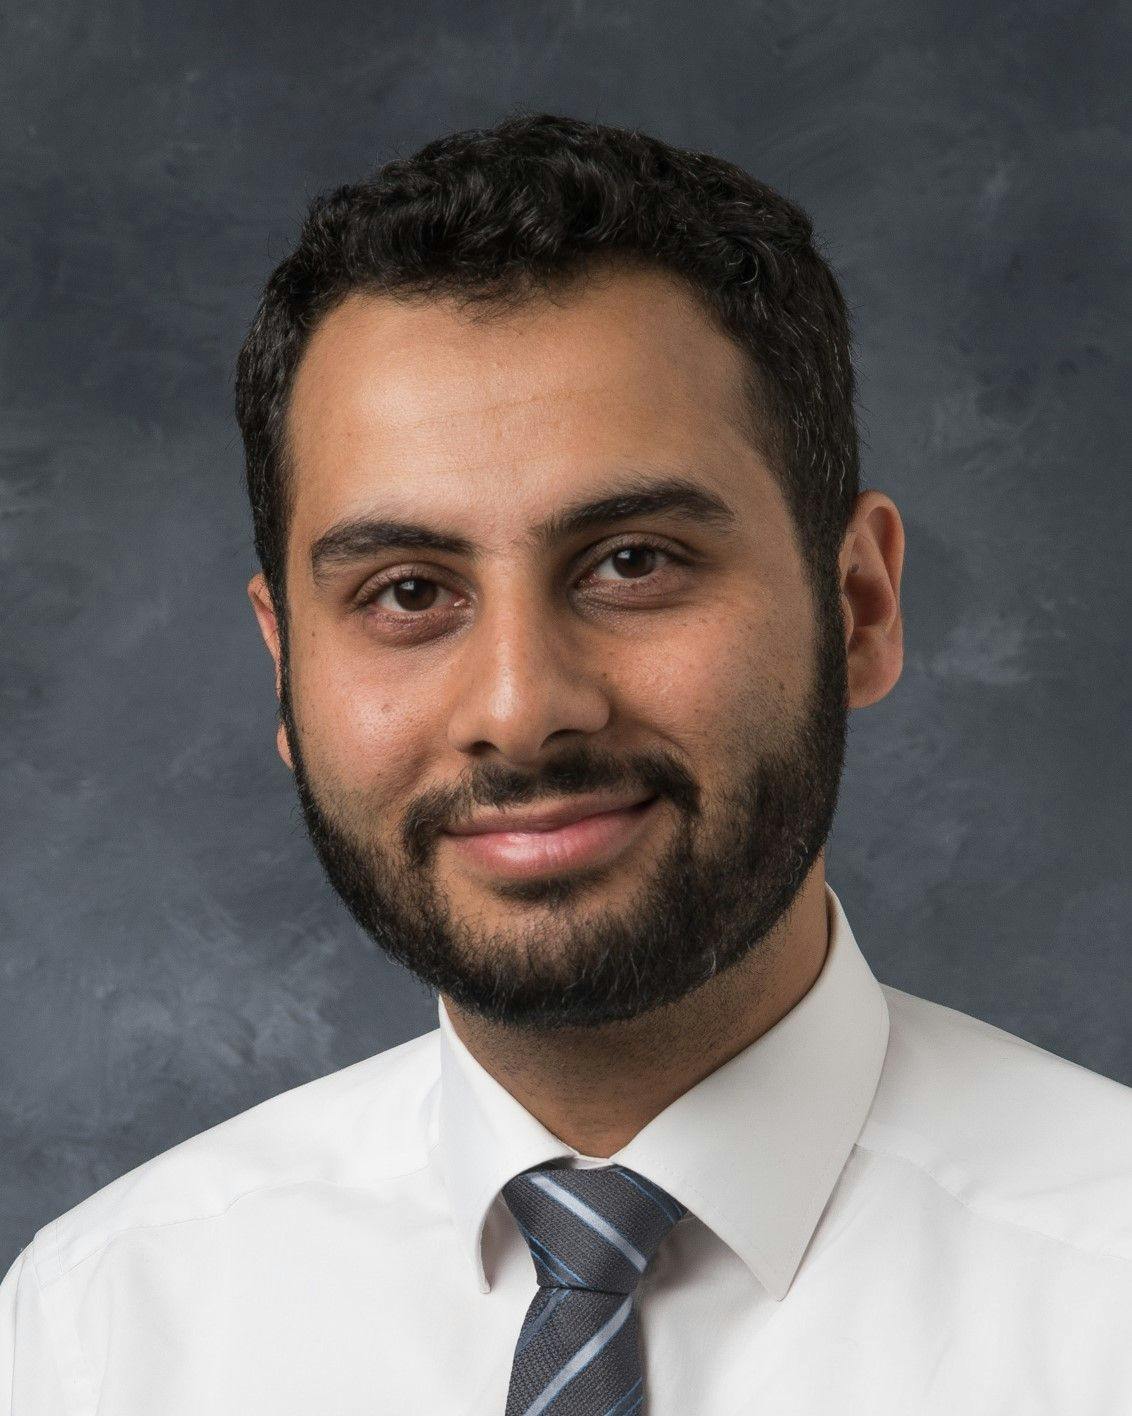 Wesam Ismail, M.Sc.. of the University of Iowa led a literature review of studies of adherence to specialty drugs and cost sharing.